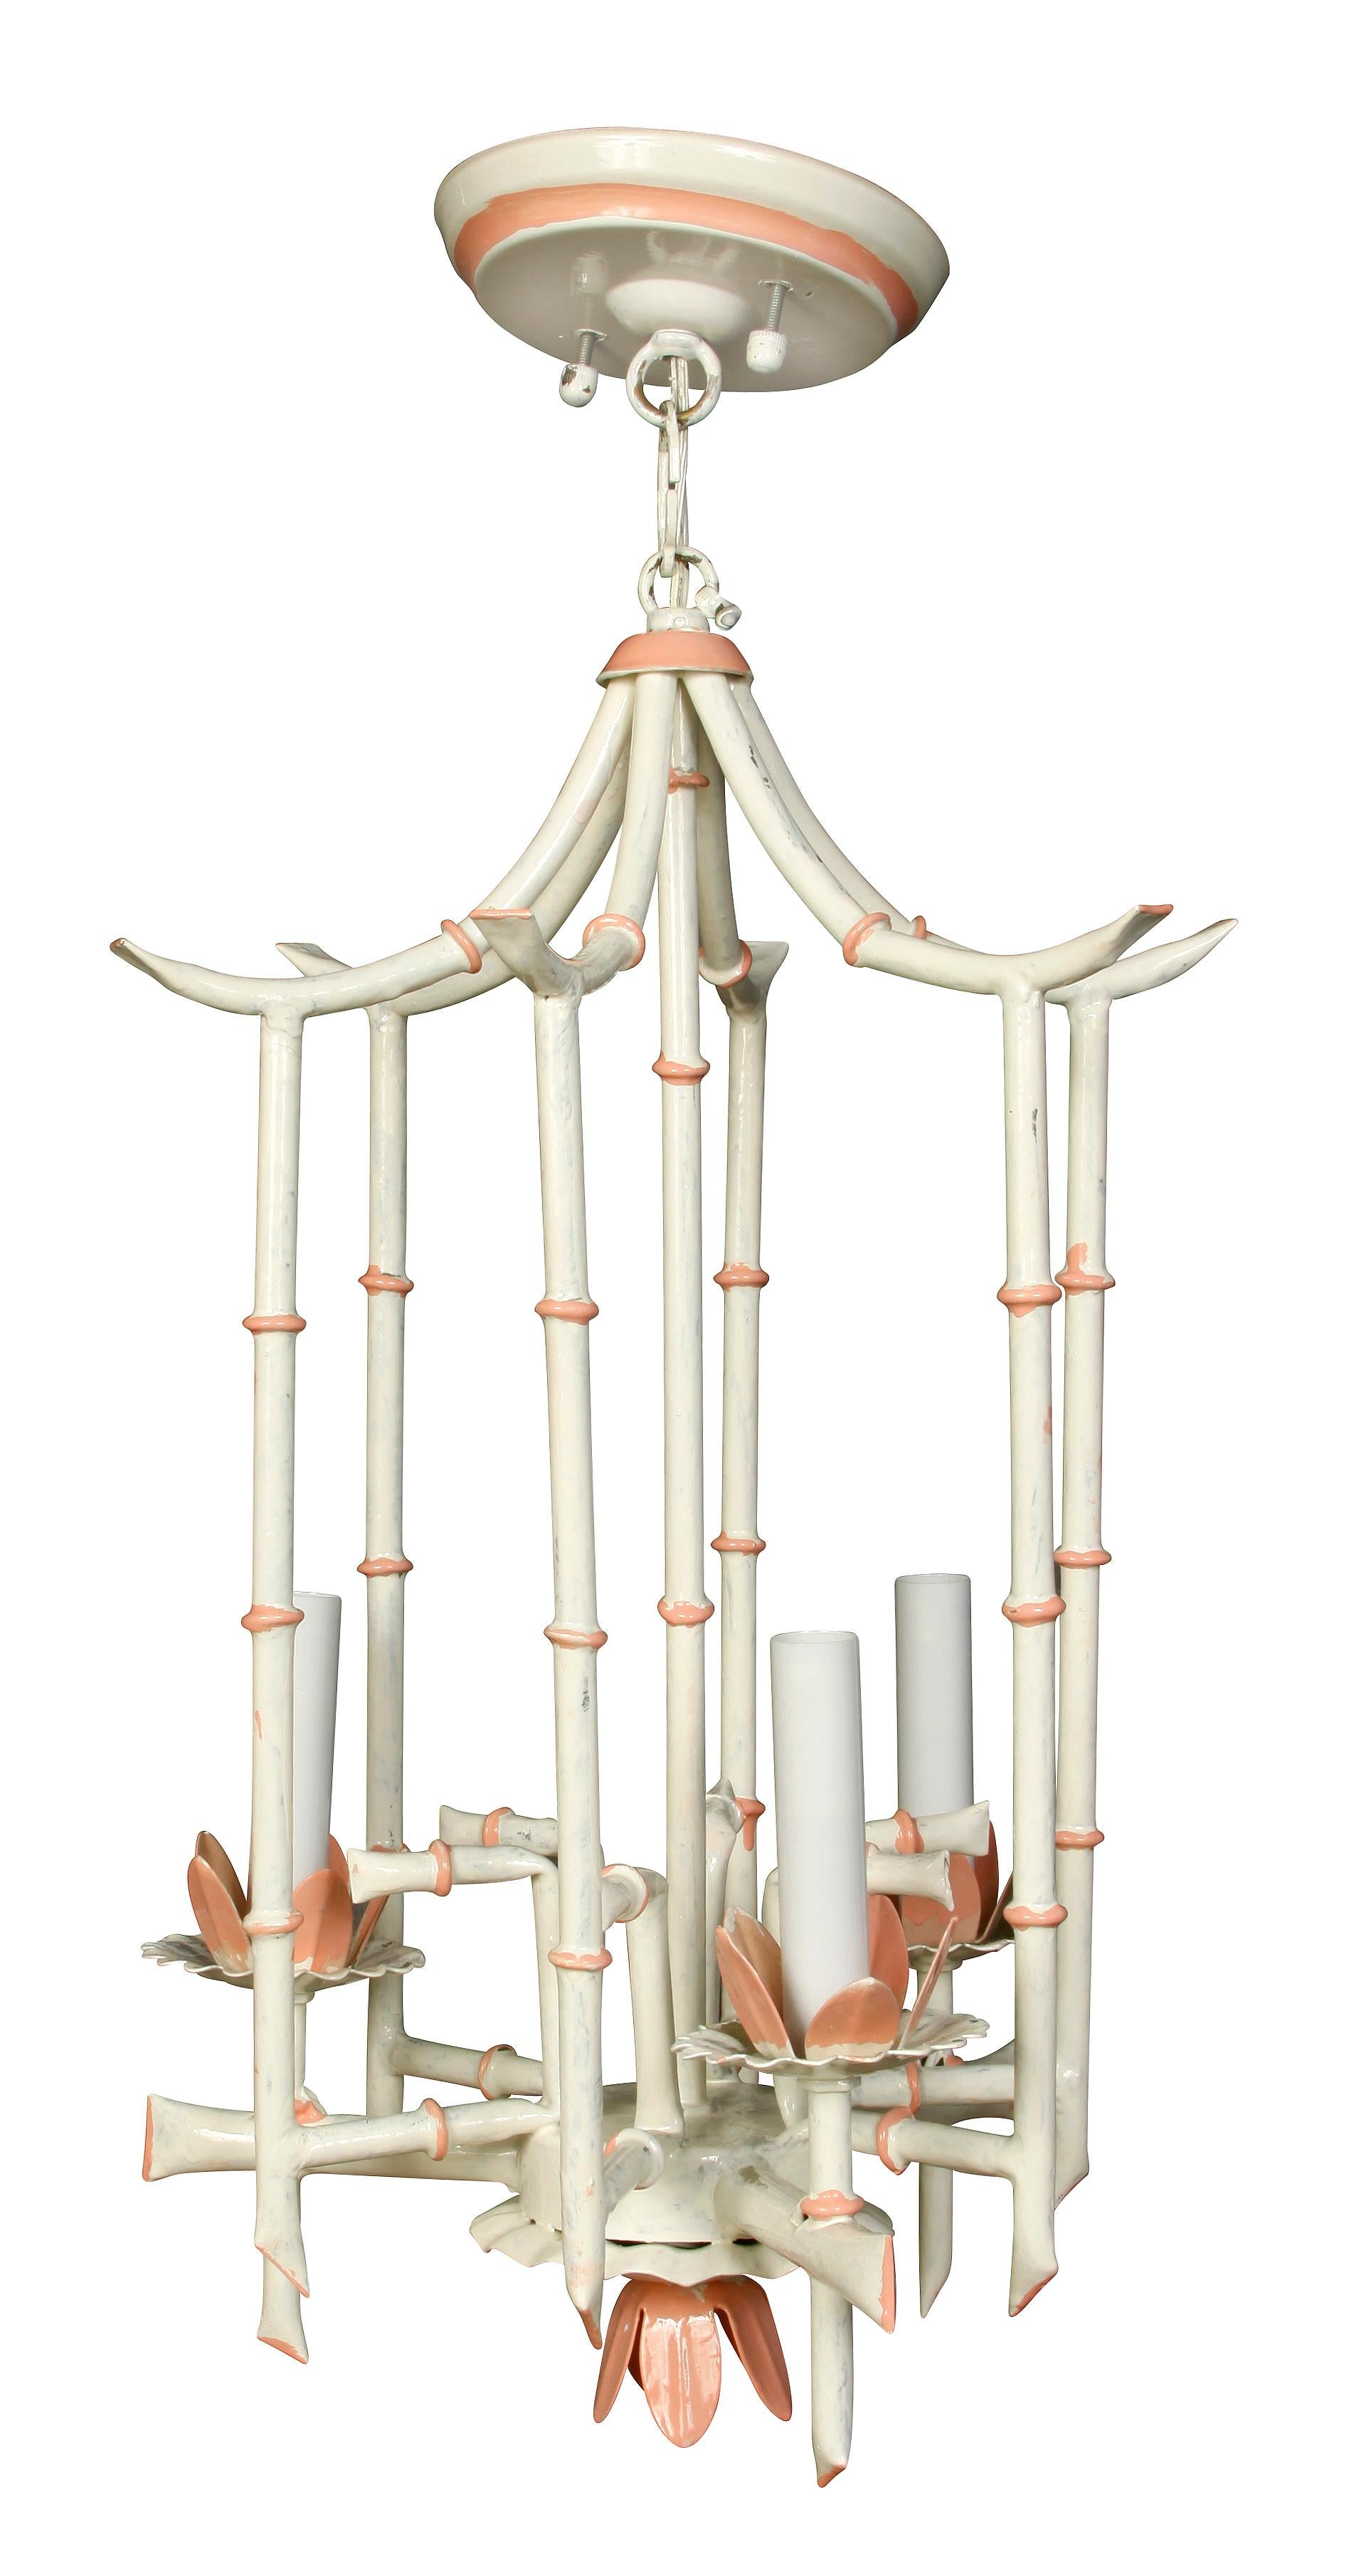 Charming vintage faux bamboo chandelier, painted white with pink coral accents.